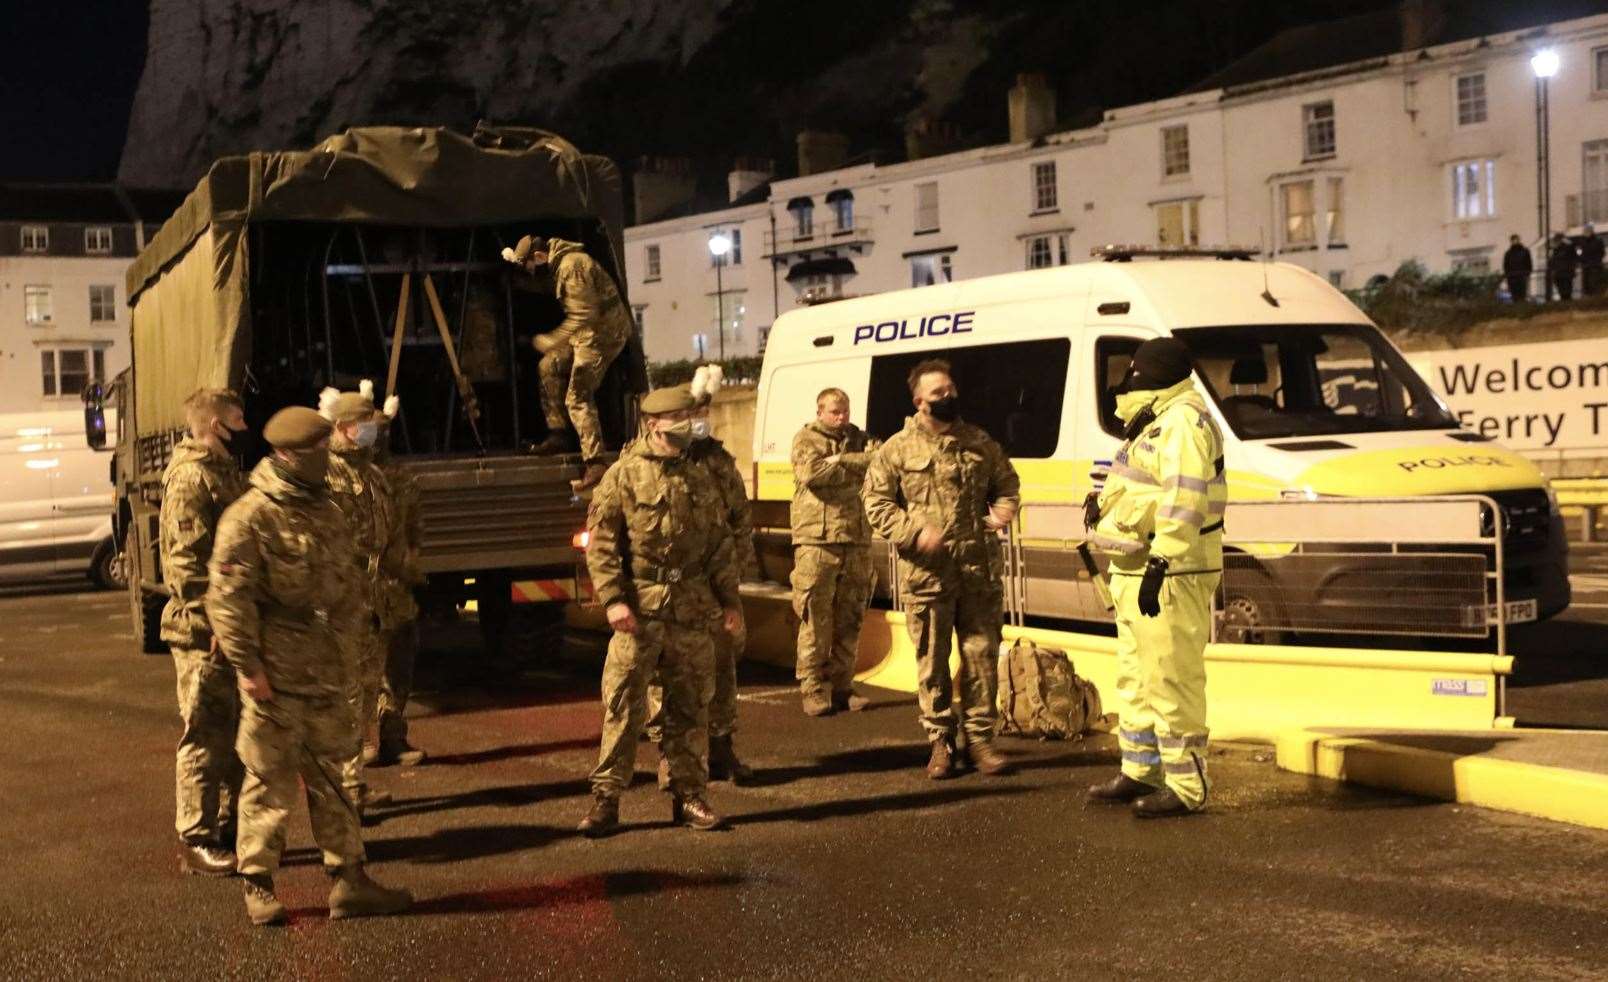 The military arrived at Port of Dover to queues of hundreds of lorries Picture: UKNIP